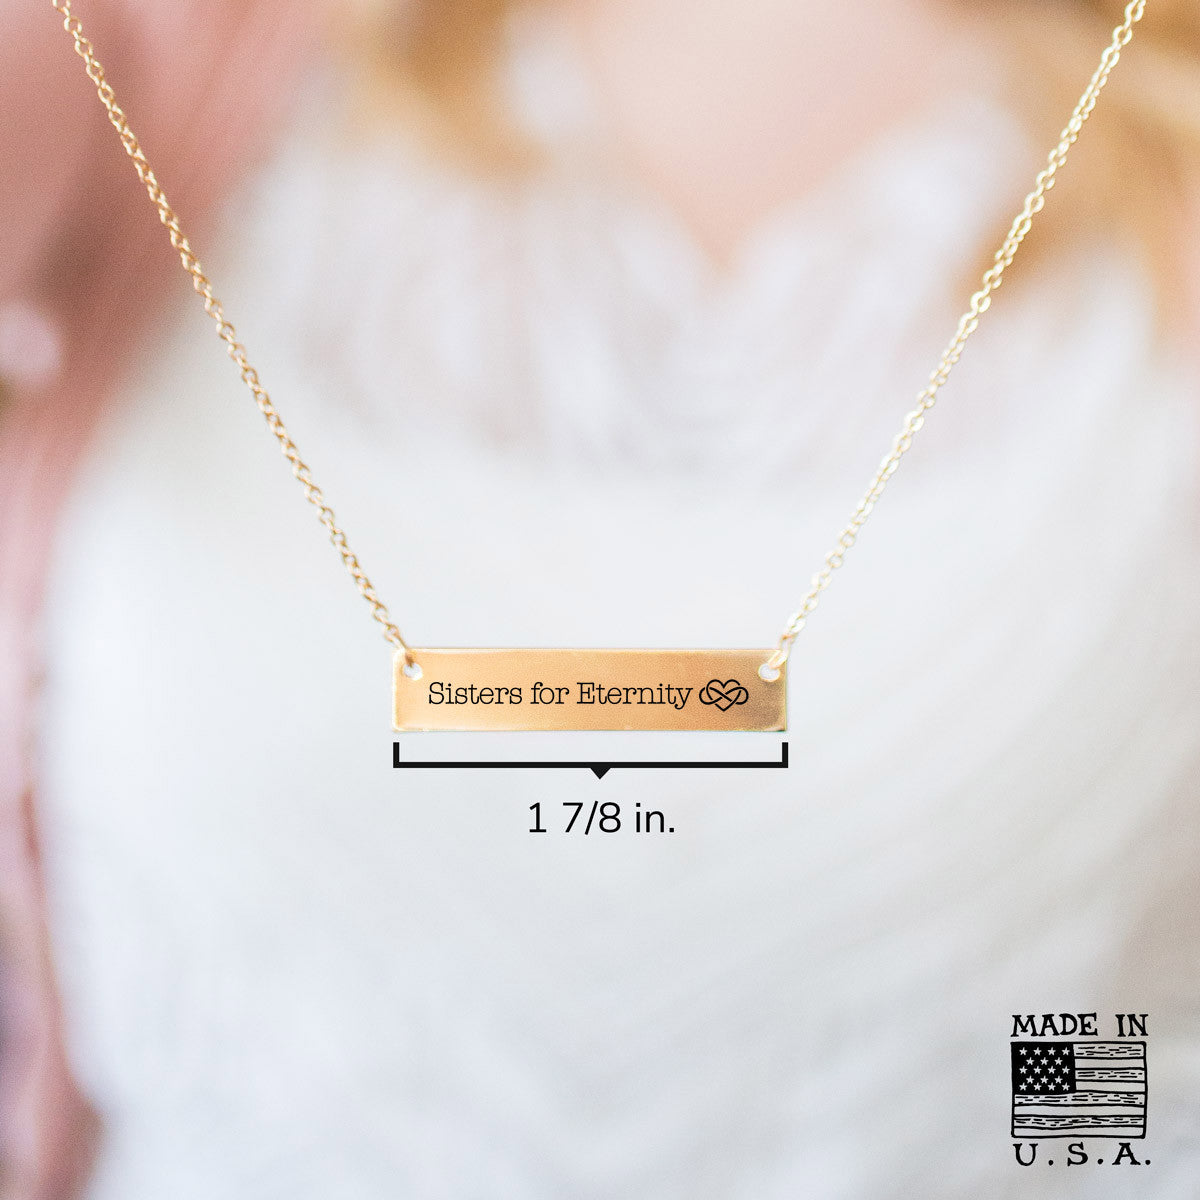 Sisters for Eternity Gold / Silver Bar Necklace - Sister Gifts - pipercleo.com